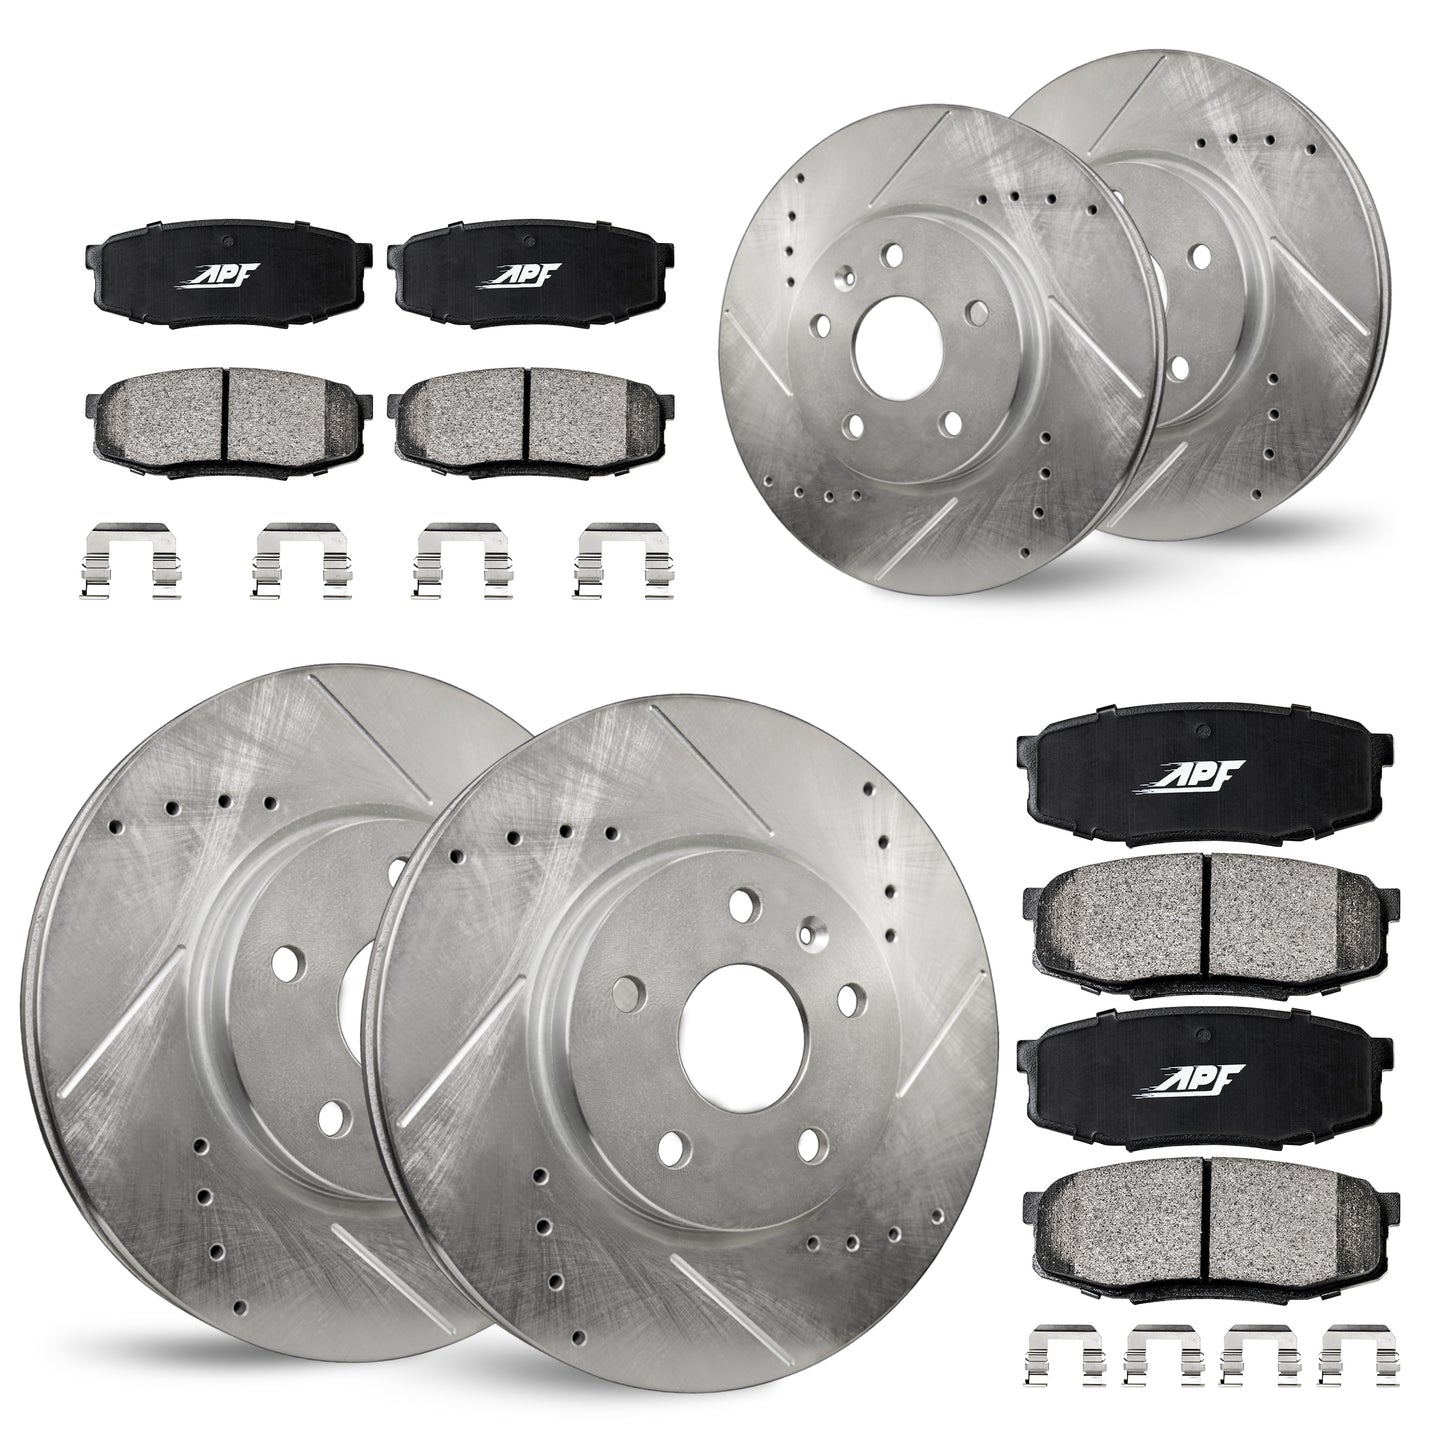 APF Full Kit compatible with Lexus ES300 2000-2001 | Zinc Drilled Slotted Rotors with Ceramic Carbon Fiber Brake Pads